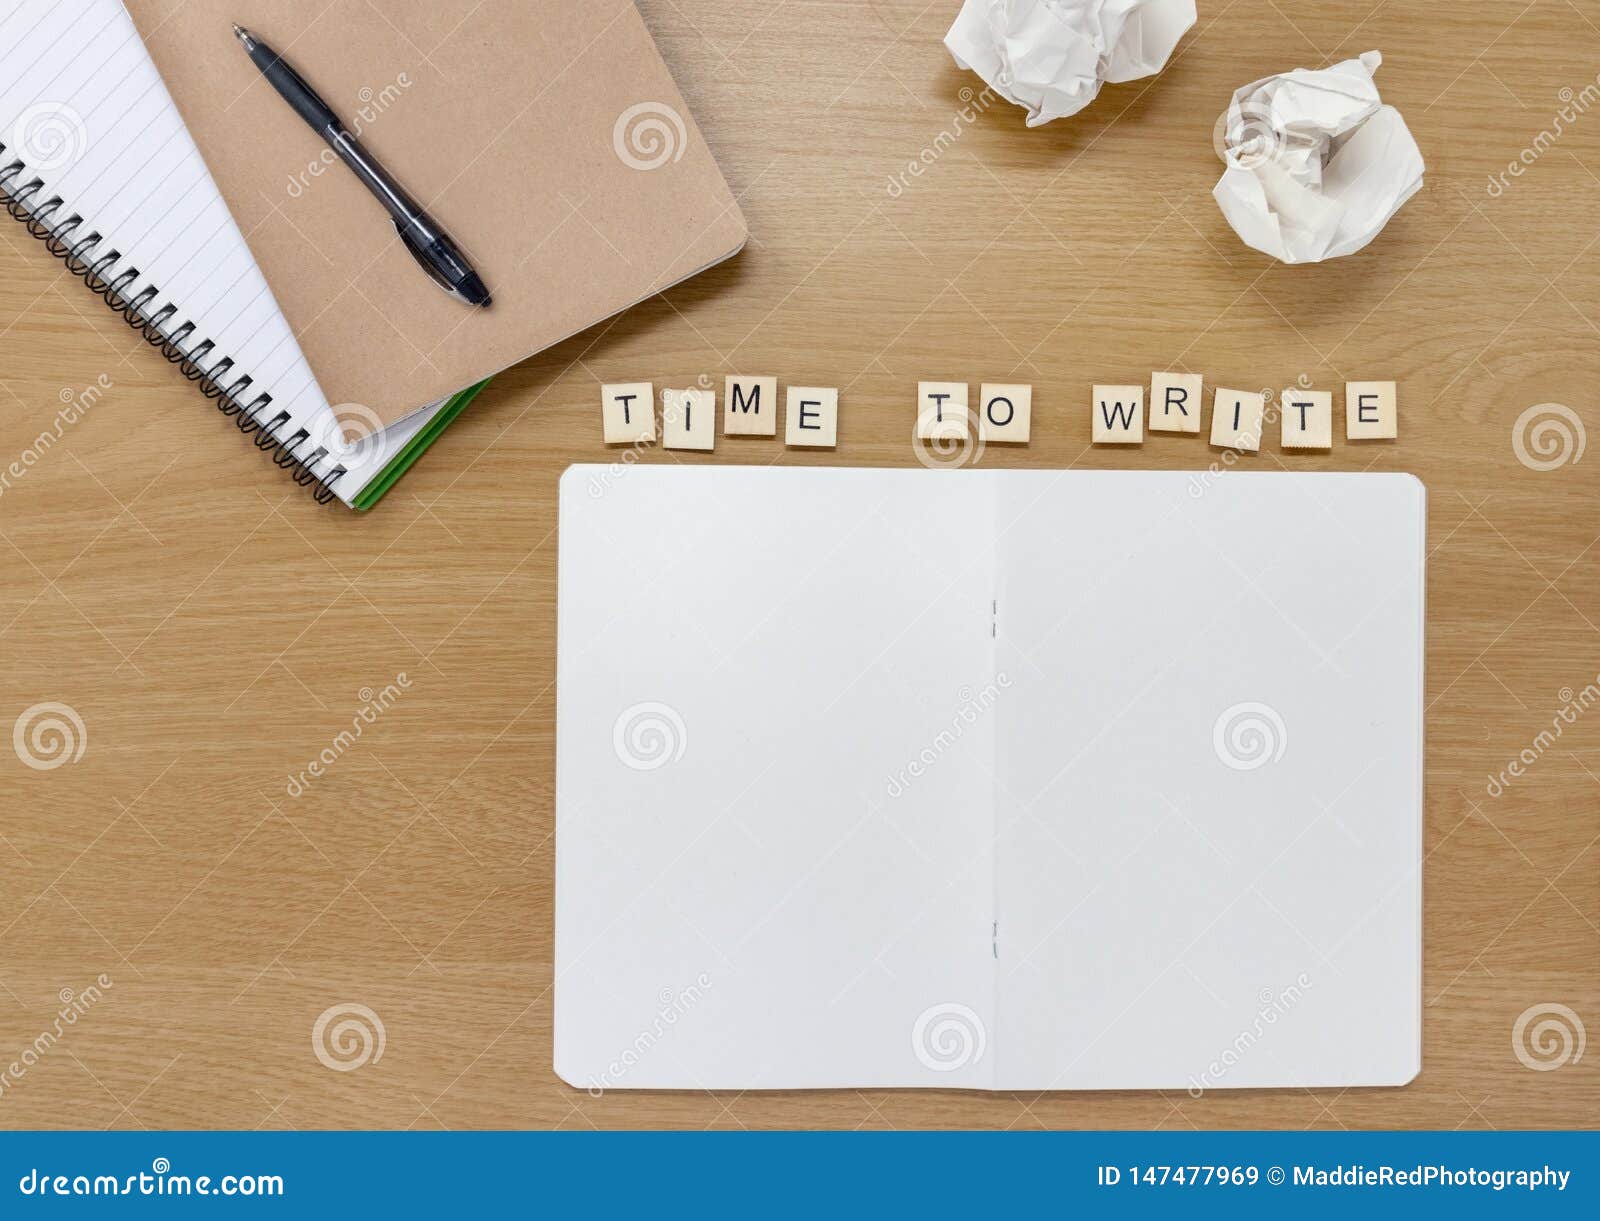 open notebook on a writer or artists desk, with tiles spelling out `time to write`